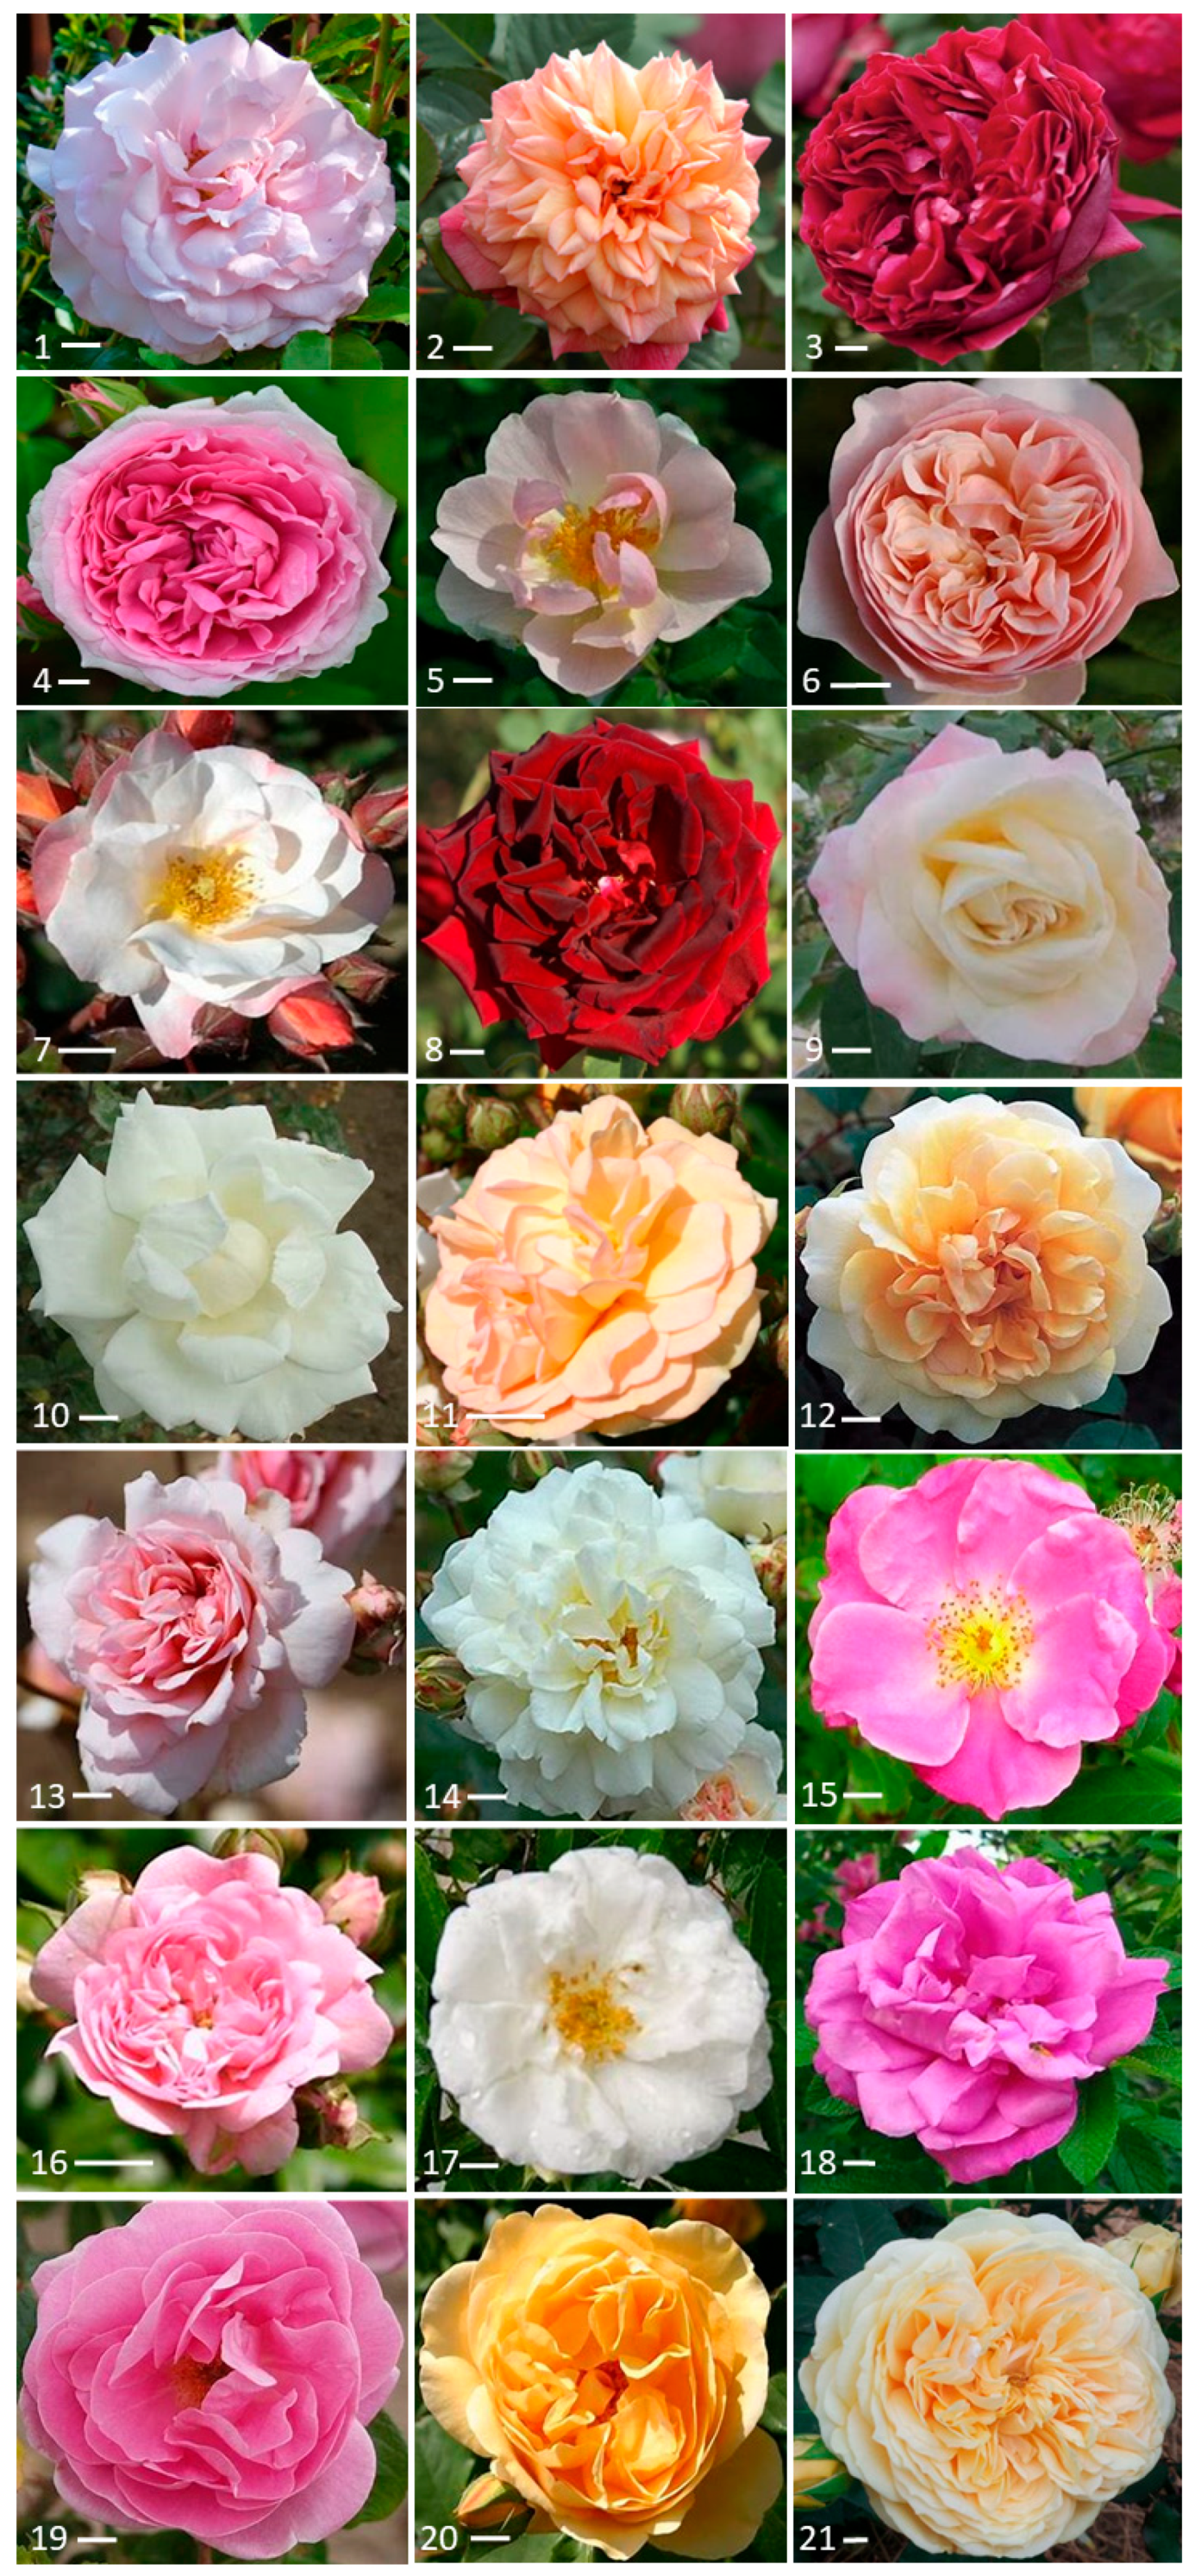 Horticulturae | Free Full-Text | The Contribution of Volatile Organic  Compounds (VOCs) Emitted by Petals and Pollen to the Scent of Garden Roses